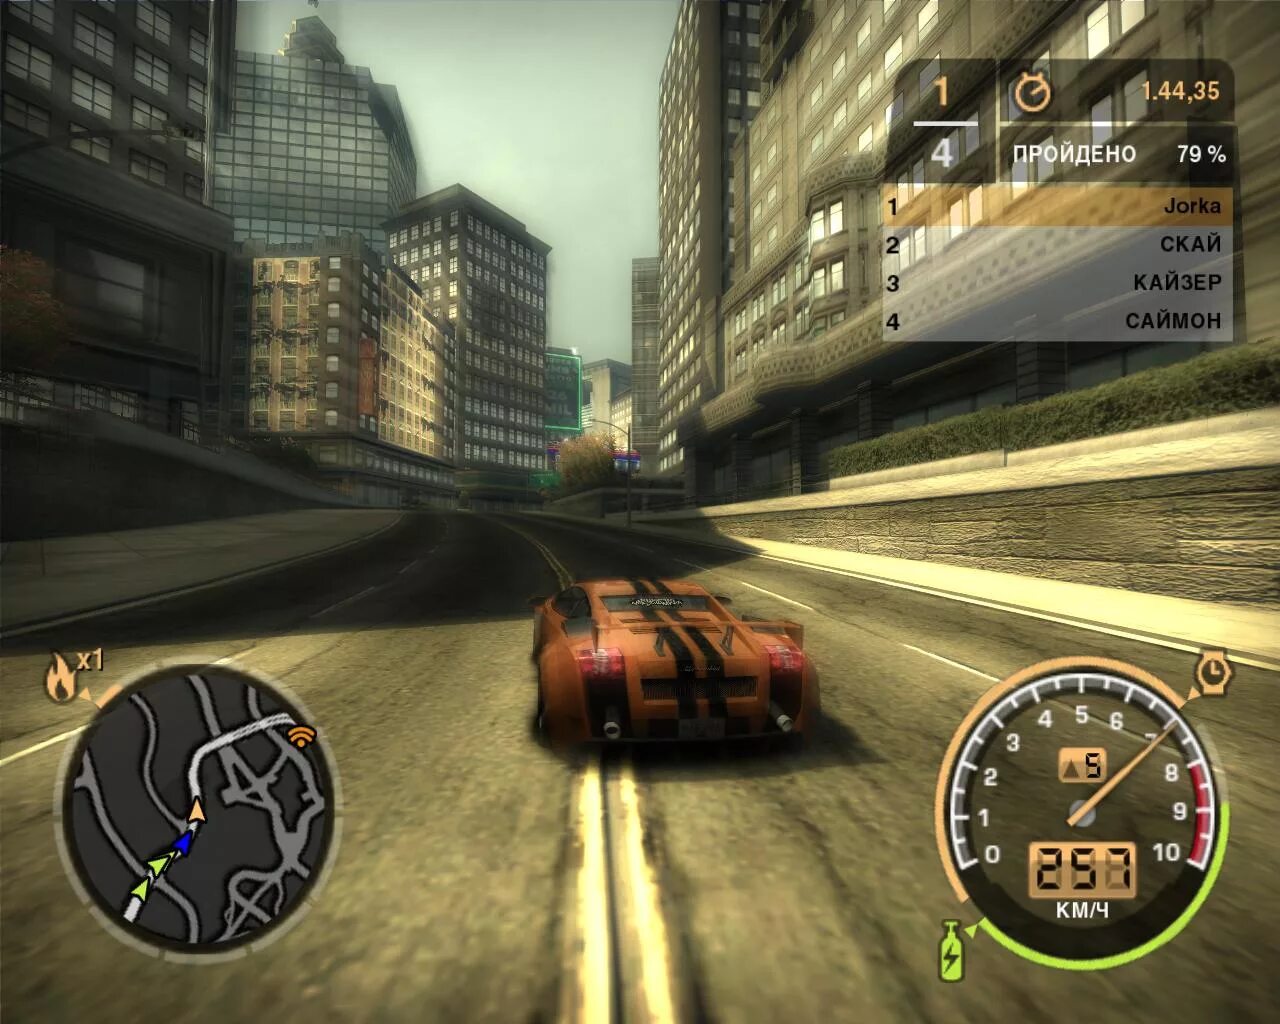 Нид фор спид 2005 на телефон. NFS most wanted 2005. NFS most wanted 2005 mobile Android. NFS MW 2005 Android. NFS most wanted 2005 на андроид.